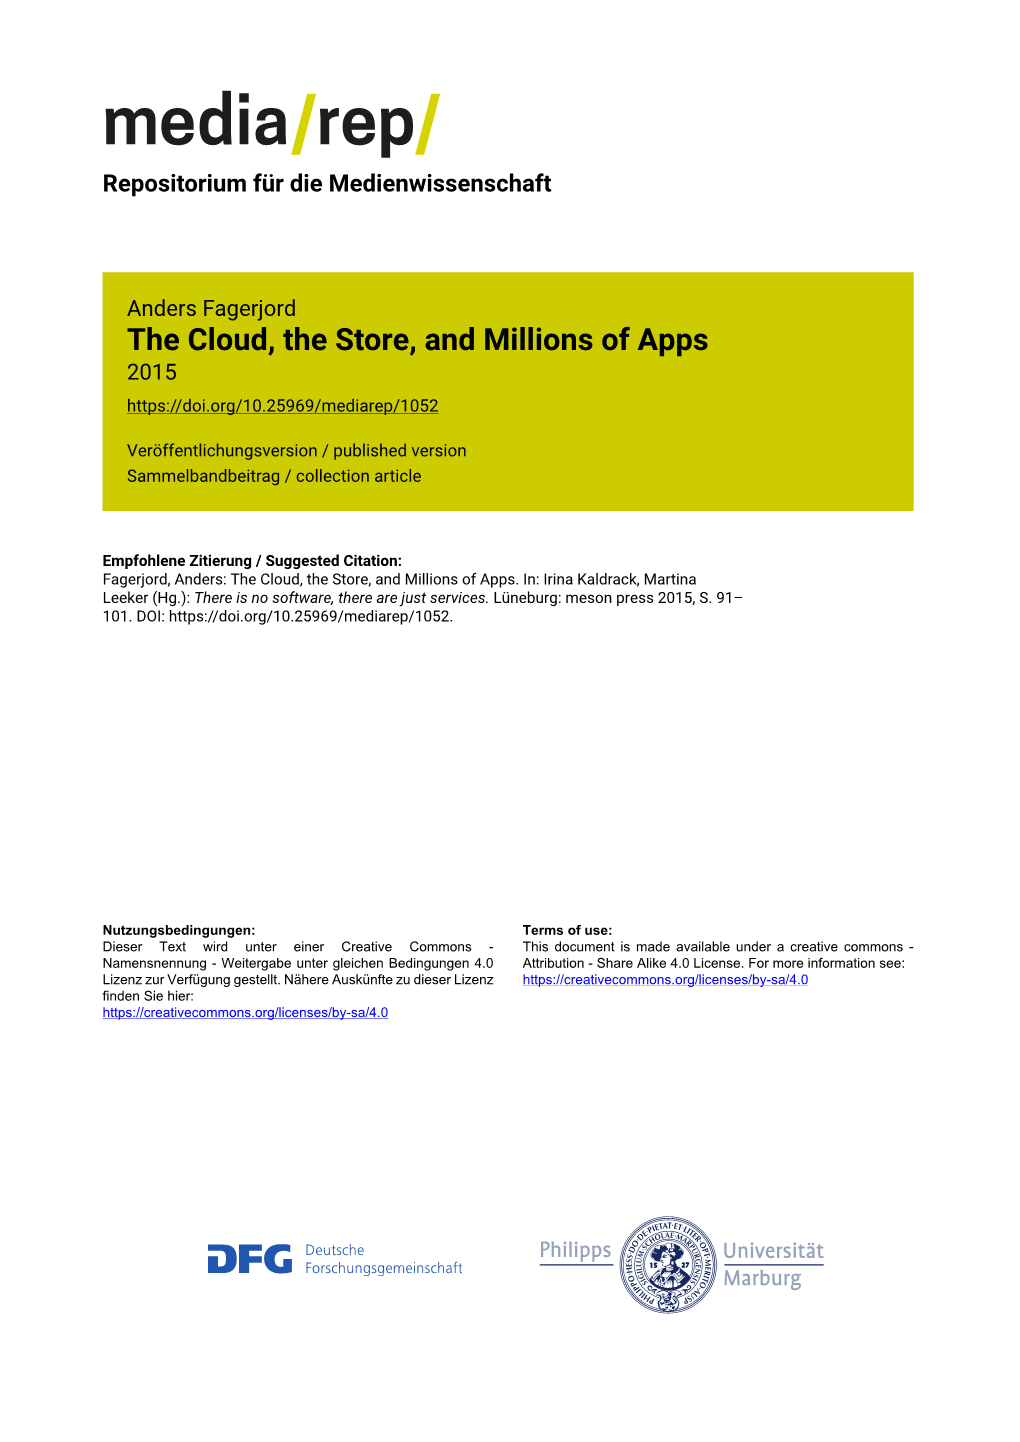 The Cloud, the Store, and Millions of Apps 2015